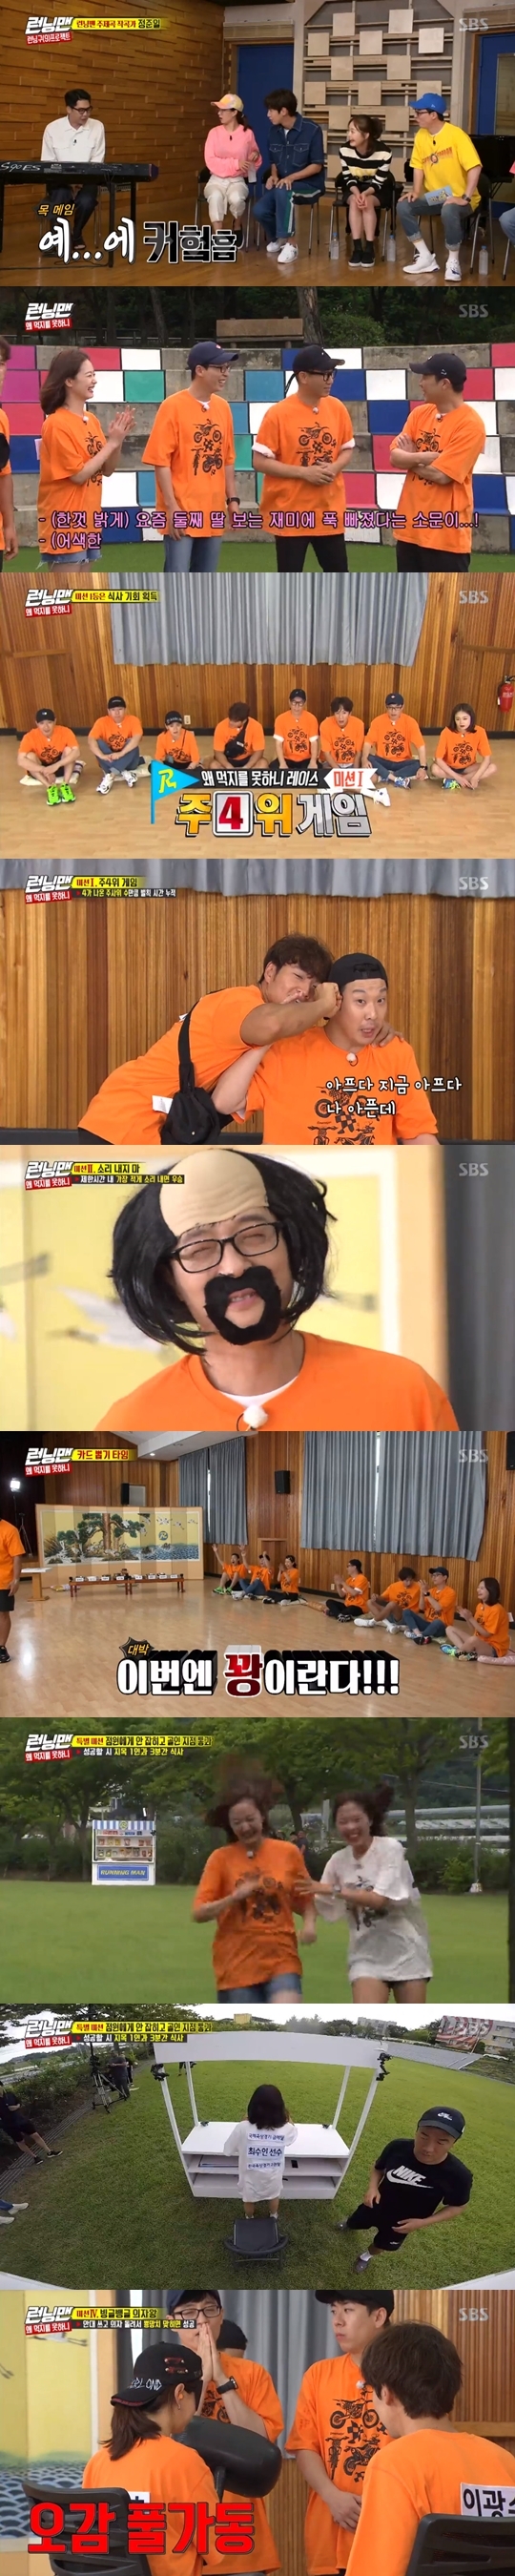 Seoul) = Running Man members have set out on mission for fan meeting theme song.SBS Running Man, which was broadcasted at 5 pm on the 4th, was decorated with a running area (9) project and was shown to be conducting the theme song project.On this day, the theme song composer Jeong Joon-Il appeared and quietly answered Yes to the question Is Variety the first time?He said, I received a proposal for the theme song and said Baro accepted it.The members enthusiastically sang Kim Bum-soos I want to see to check the range.Ji Suk-jin sang after Song Ji-hyo, Lee Kwangsoo and Yoo Jae-Suk, and Jeong Joon-Il laughed and laughed, saying, Ji Suk-jin is an old style to play with beats.Jeong Joon-Il received the modifier of the members and said, I was worried about not to do it. However, he released the song and applauded for completing the first theme song melody.Yoo Jae-Suk praised it as my favorite style; Jeong Joon-Il asked what he wanted to do with the lyrics style, and the members began writing.The members are surprised that more than 40,000 people have started recruiting fan meetings on the day of shooting.I am worried that we will not be able to do it. In the subsequent recent talk, Yoo Jae-Suk expressed his affection for his daughter, saying, My second daughter is a stone, and there is a story that she resembles me, and there is a story that she resembles Na Kyung-eun.Also, Ji Suk-jin claimed that Kim Jong-kook was not getting married, and Yoo Jae-Suk also said, The end says that he is not getting married; he does not have a blind date.I have to open my mind myself. The members first conducted the fourth-place game of the week with the Why cant I eat mission, where the penalty time is accumulated as much as the number of dice that came out of the fourth and the meal is decided.The dice number then decided to punish the ballet, and the members pulled the ballet according to whether or not they were 4.Eventually, Haha and the end were left, and the end was Hahas attack, but Haha could not bear it, and after the end won, he picked up the Bokbulbok Show card.However, My card took 10 seconds to eat, and Haha ate cold noodles for 10 seconds.The second mission had to be punished for making a sound with Do not make a sound.The members who were helpless in their attacks appeared to be ridiculous makeup and struggled to make the least noise within the time limit.Kim Jong-kook, who laughed once, won, but was slammed in the card selection and became a crack-up on the day.The third mission was I am a common sense king, which was a game that explained the related presentation for 10 seconds and answered the correct answer.Although the promotion of Jaeseok was expected, the team with Somin eventually won the championship and had to pass the goal point without being caught by the clerk.Somin got bottled water and ran to the point where he was scored, but he was caught by a clerk who caught up with a tremendous speed and failed.The clerk was Kimcheon Hanil Girls High School Choi Soo-in, one of the best stars in the Baro track and field.The fifth mission was to succeed by wearing an eye patch as a king of the Bingle Bangle chair and turning the chair to hit Maangchi.Kwangsoo, who wrote the eye bandage, failed to blow the swing, followed by Ji Hyo with Maangchi to Kwangsoo.Haha, who chose Bang, performed a special mission as the first prize, and succeeded in the mission by winning the mission point with a car of the first time and ate food for 3 minutes.Except Haha and Ji Hyo, six people had to pick up the Bokbulbok Show card, and Ji Suk-jin, who picked X, had to make a transcendent makeup.Meanwhile, Running Man is broadcast every Sunday at 5 pm.